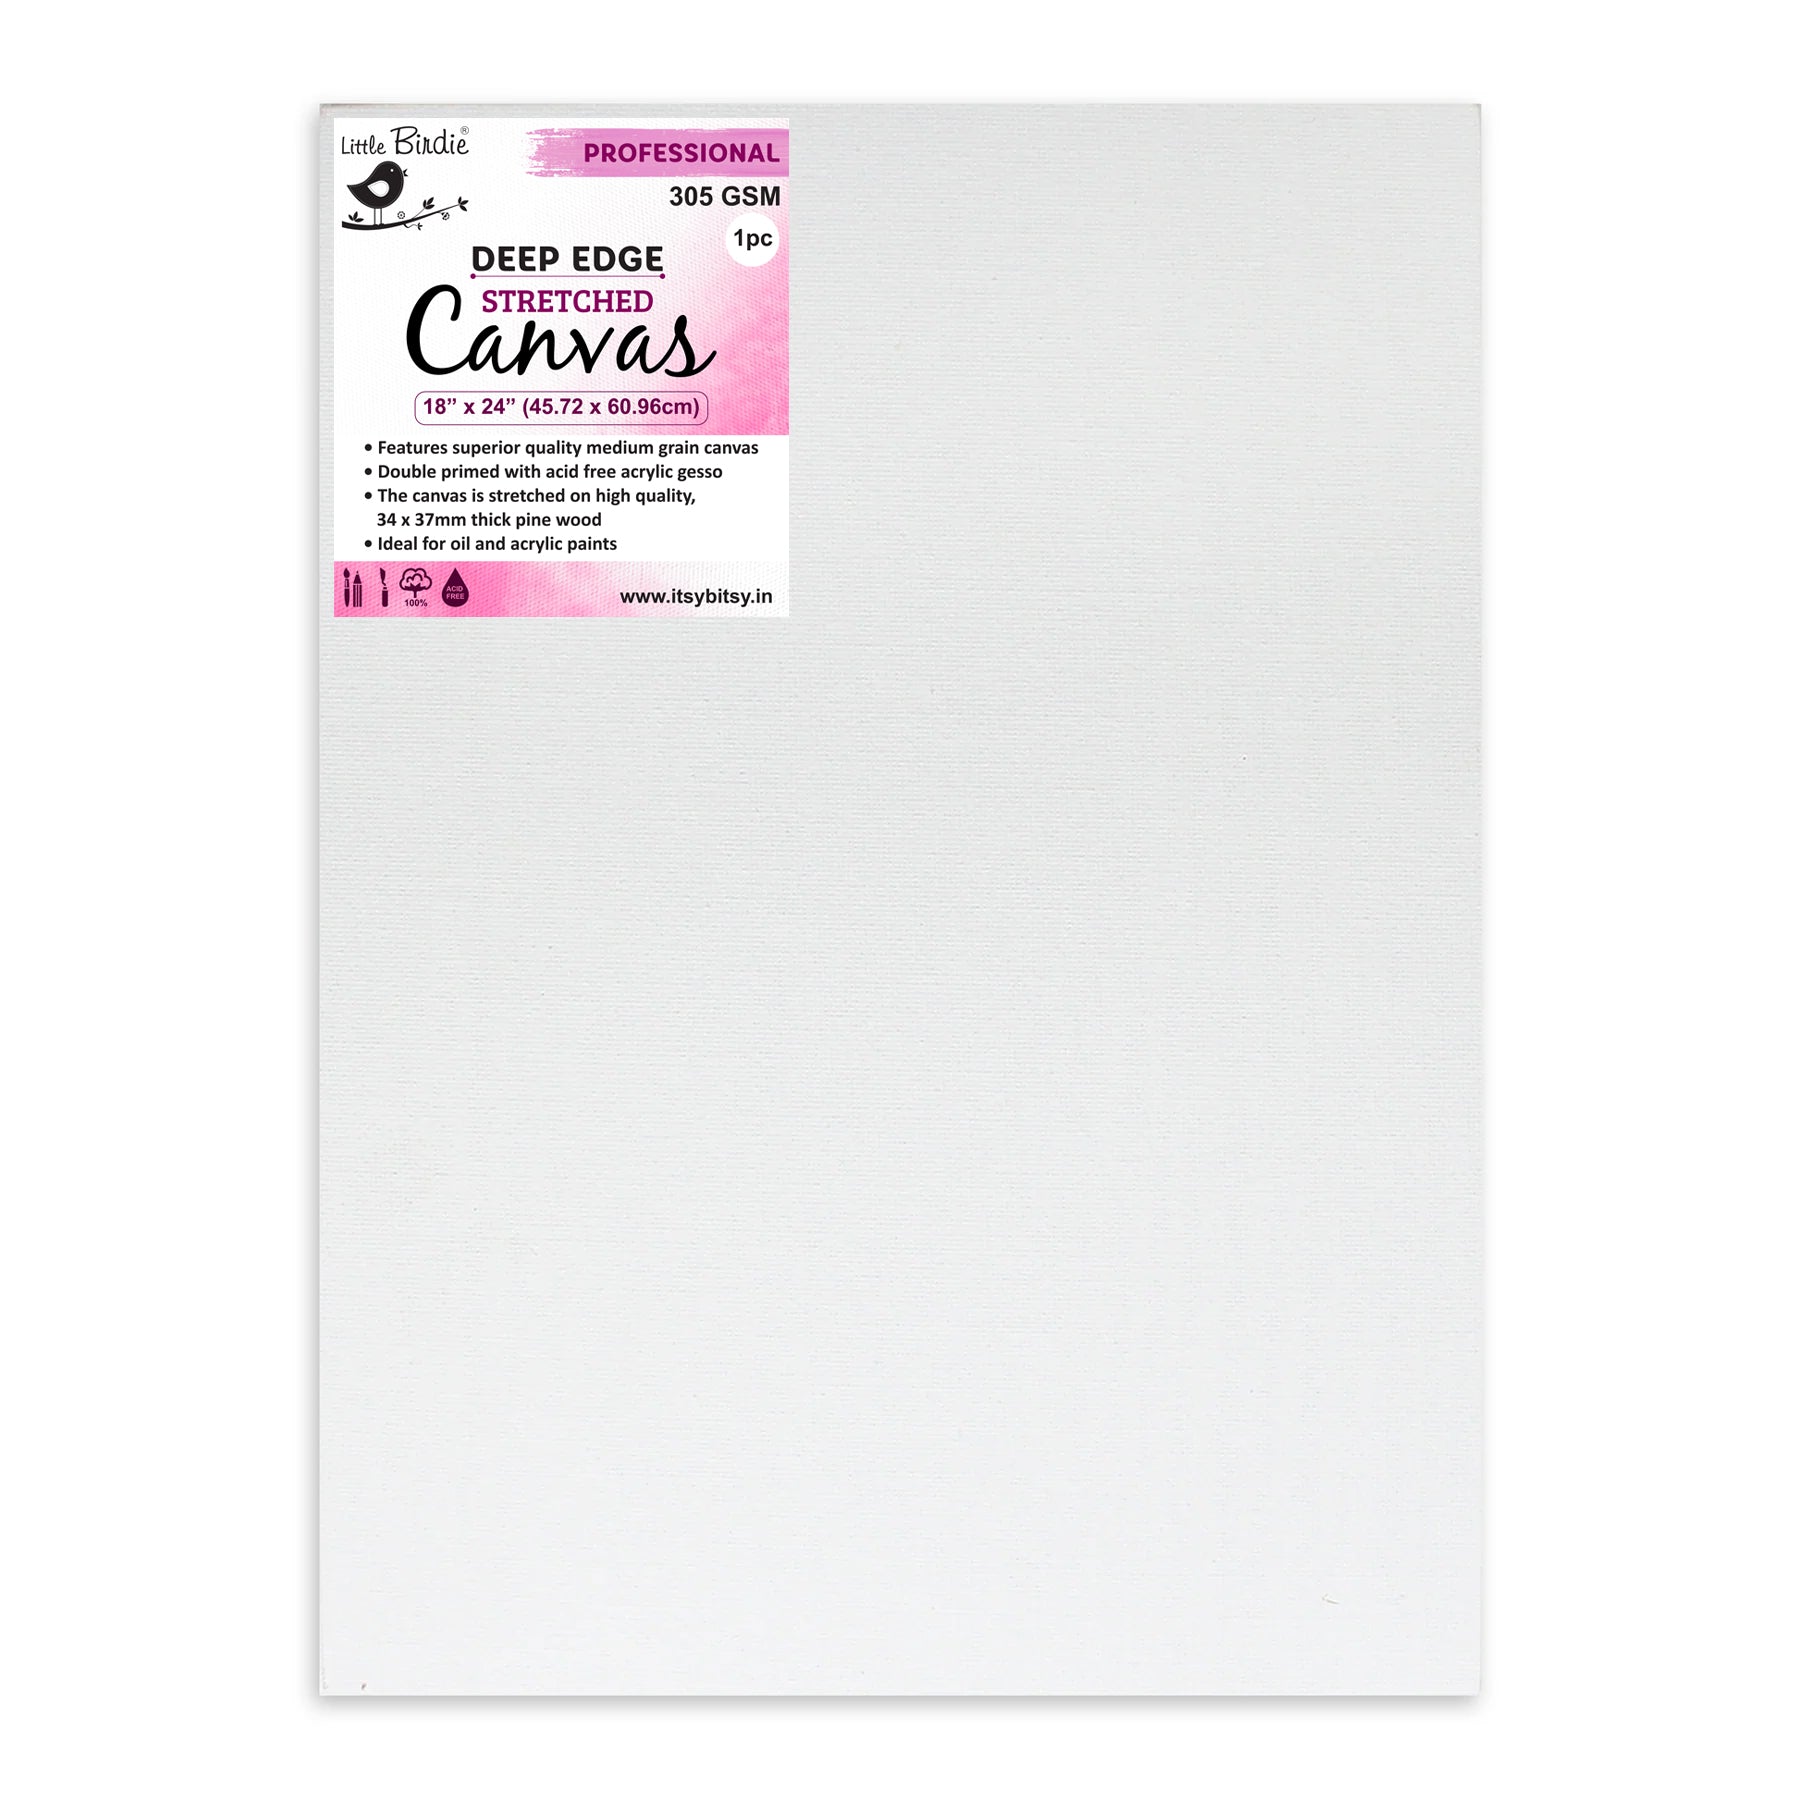 Stretched Canvas Deep Edge Frame 34X37Mm 305Gsm 18 X 24Inch 1Pc